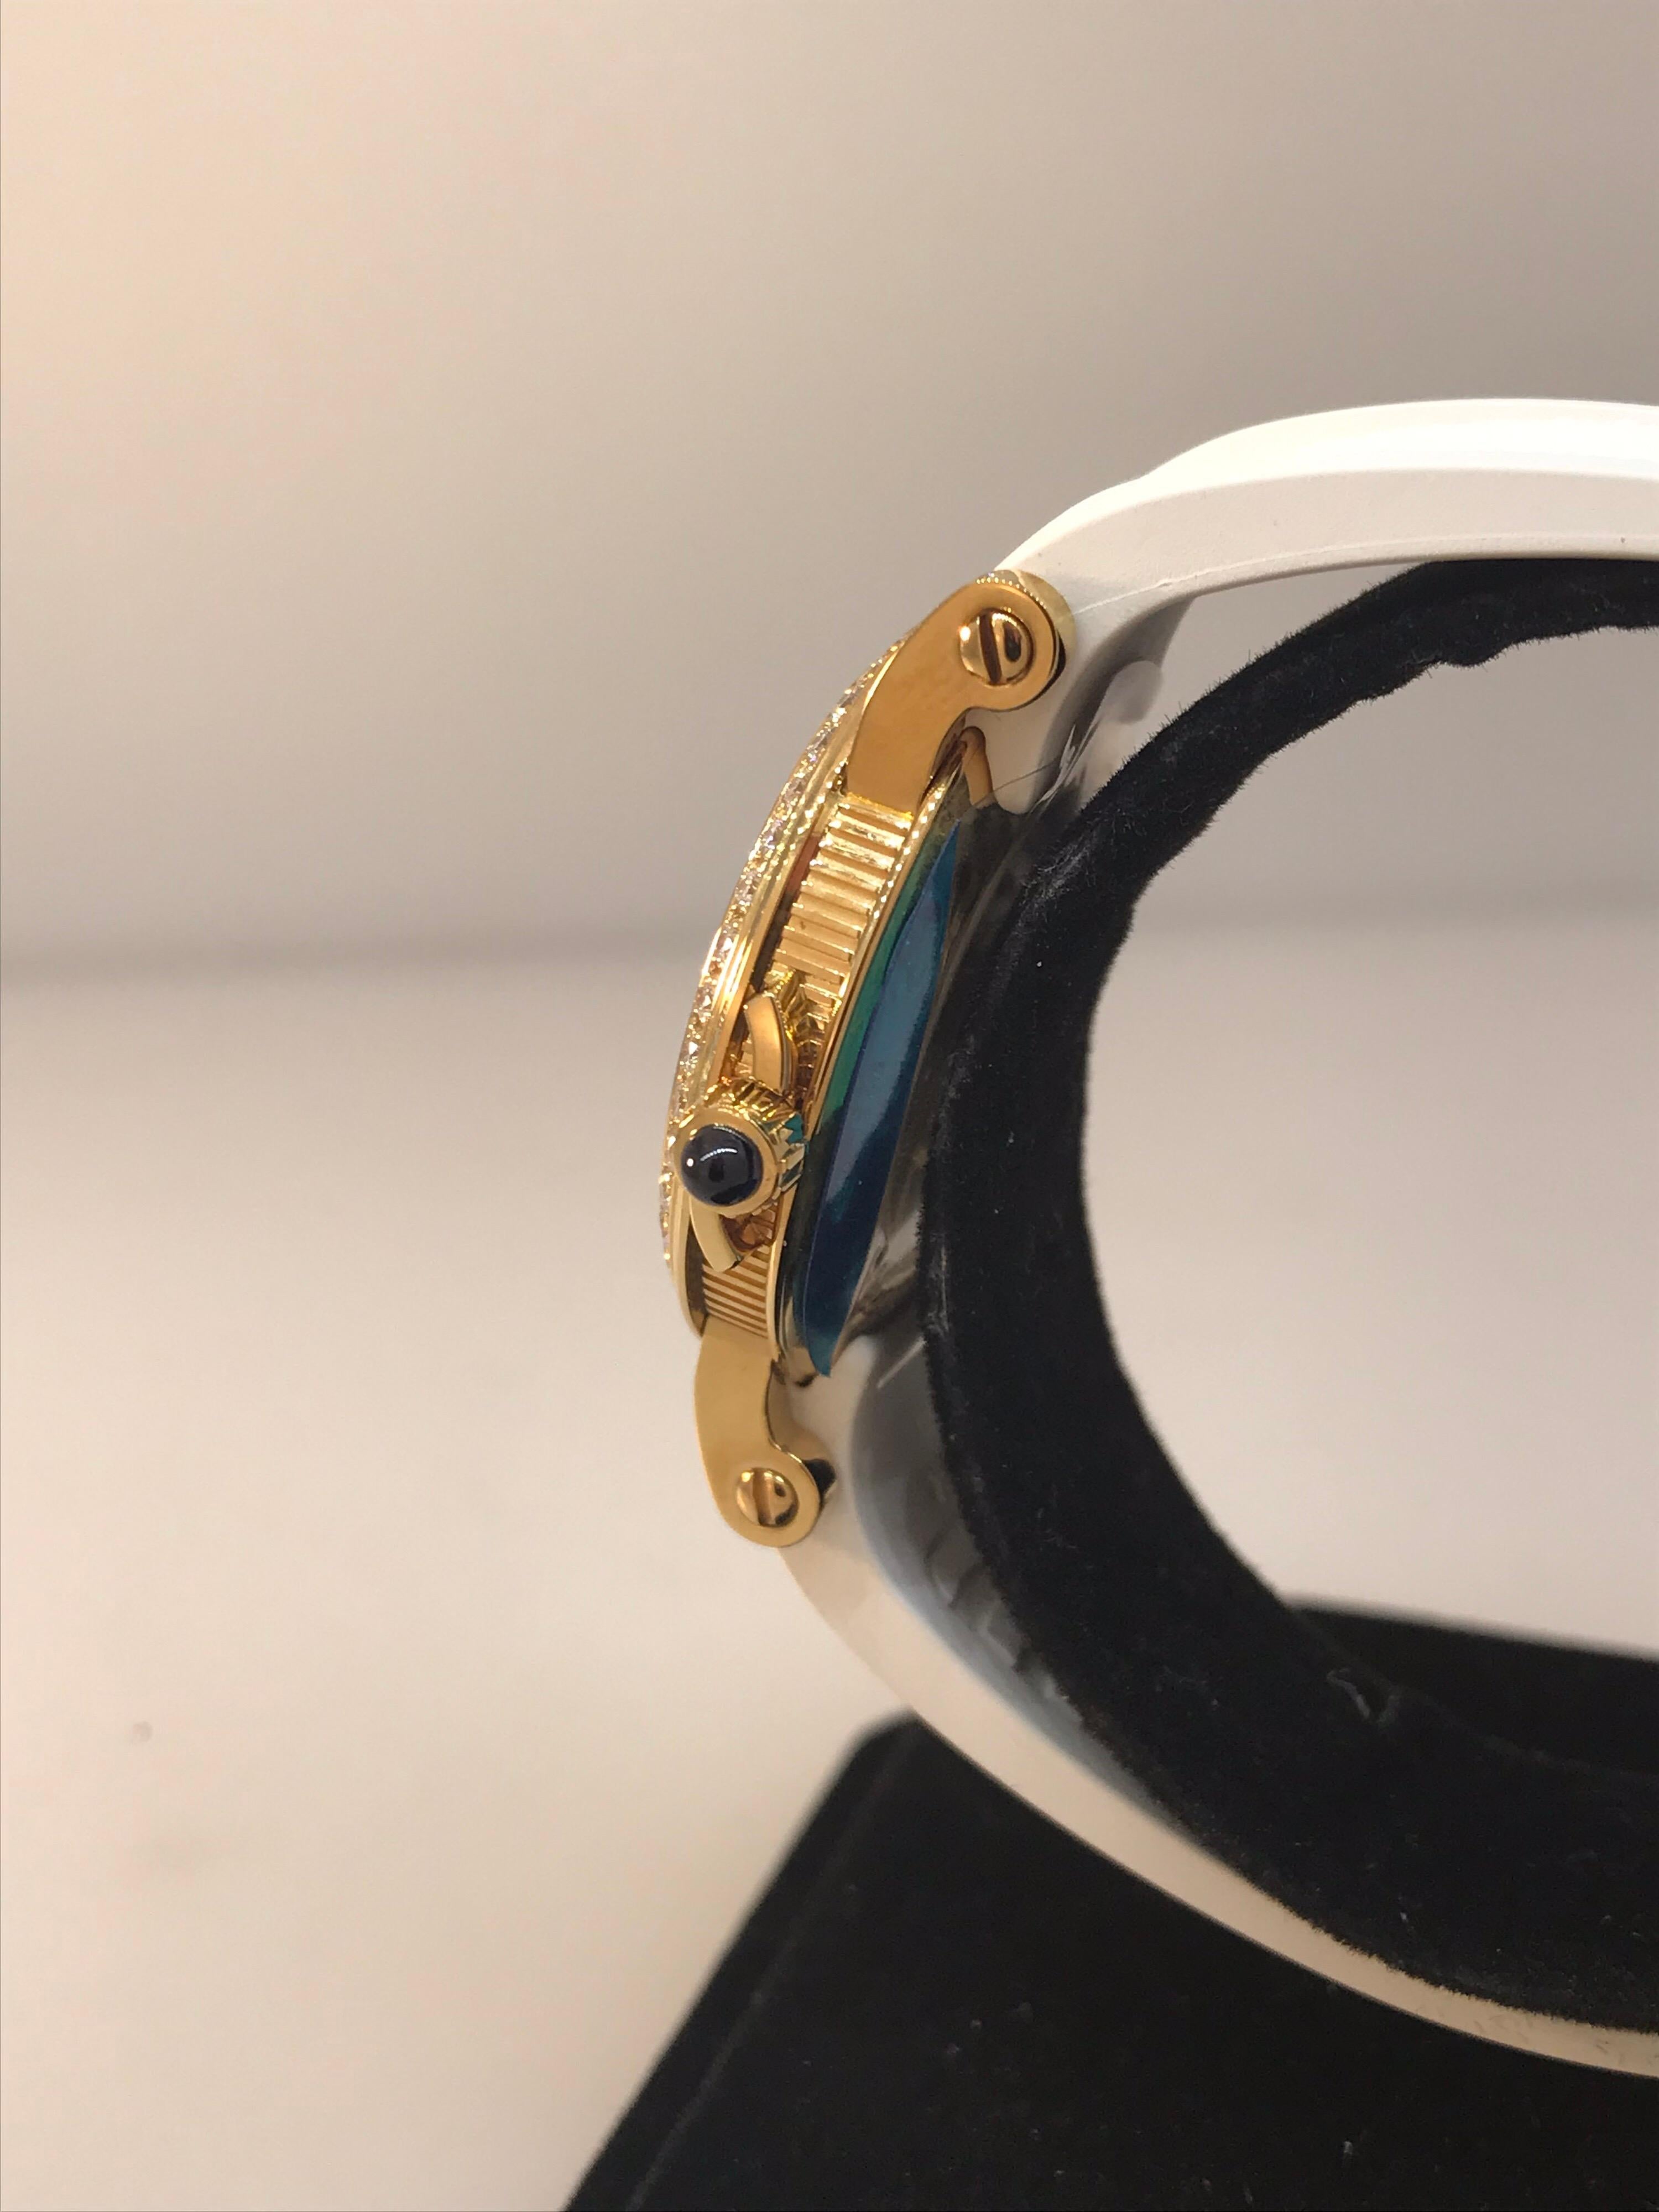 Breguet Marine Yellow Gold Diamond Bezel Ladies Watch 8818ba/59/564.dd00 New In New Condition For Sale In New York, NY